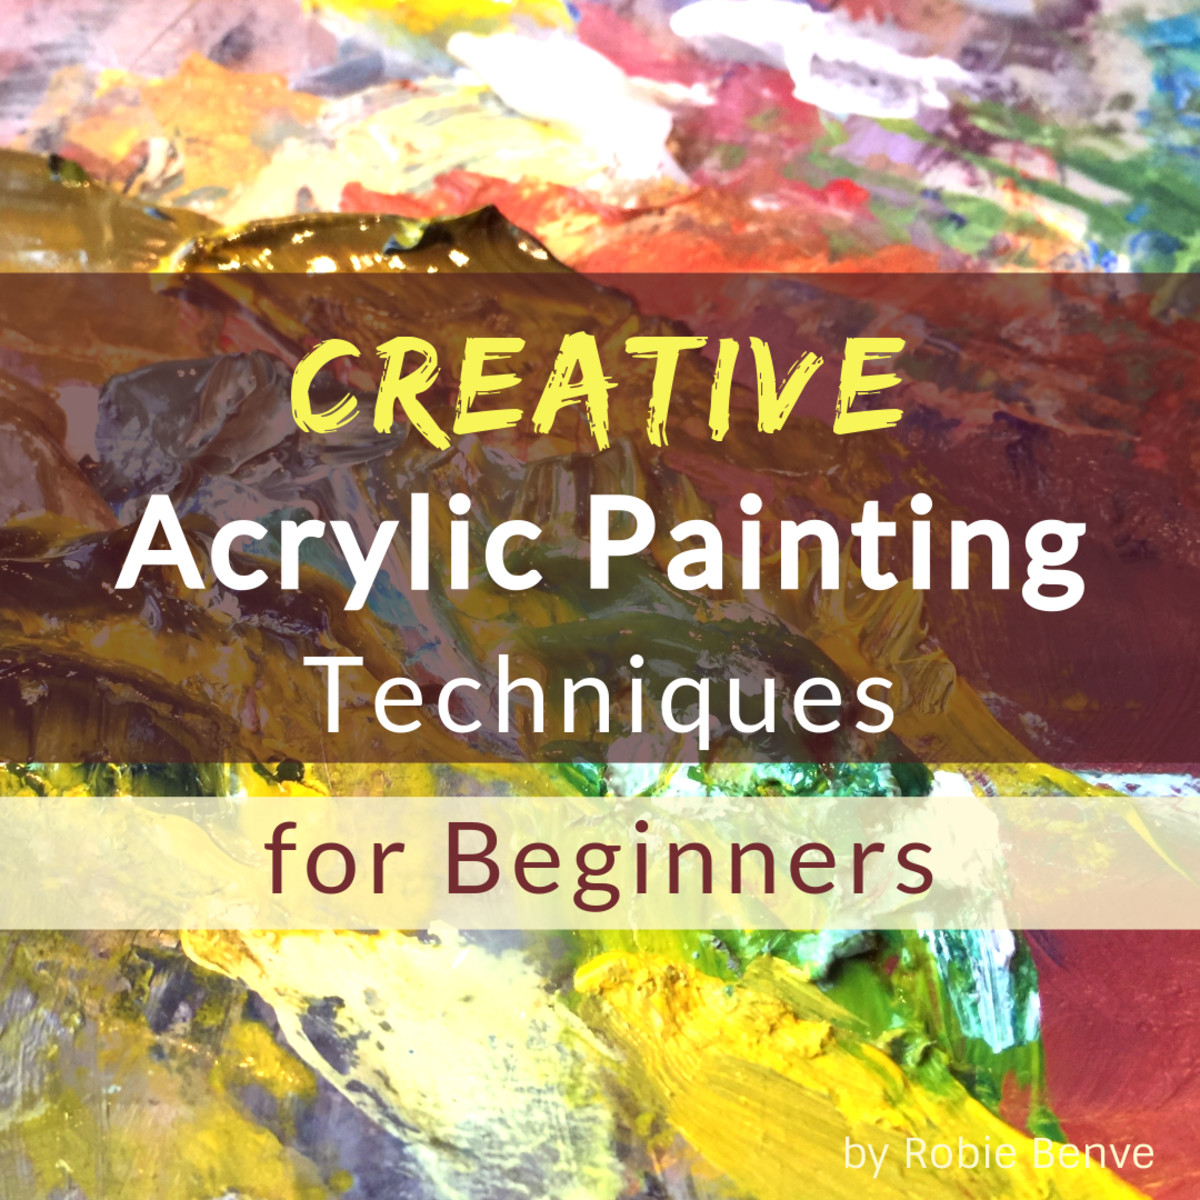 7 Acrylic Painting Techniques for Texture and Fun Effects